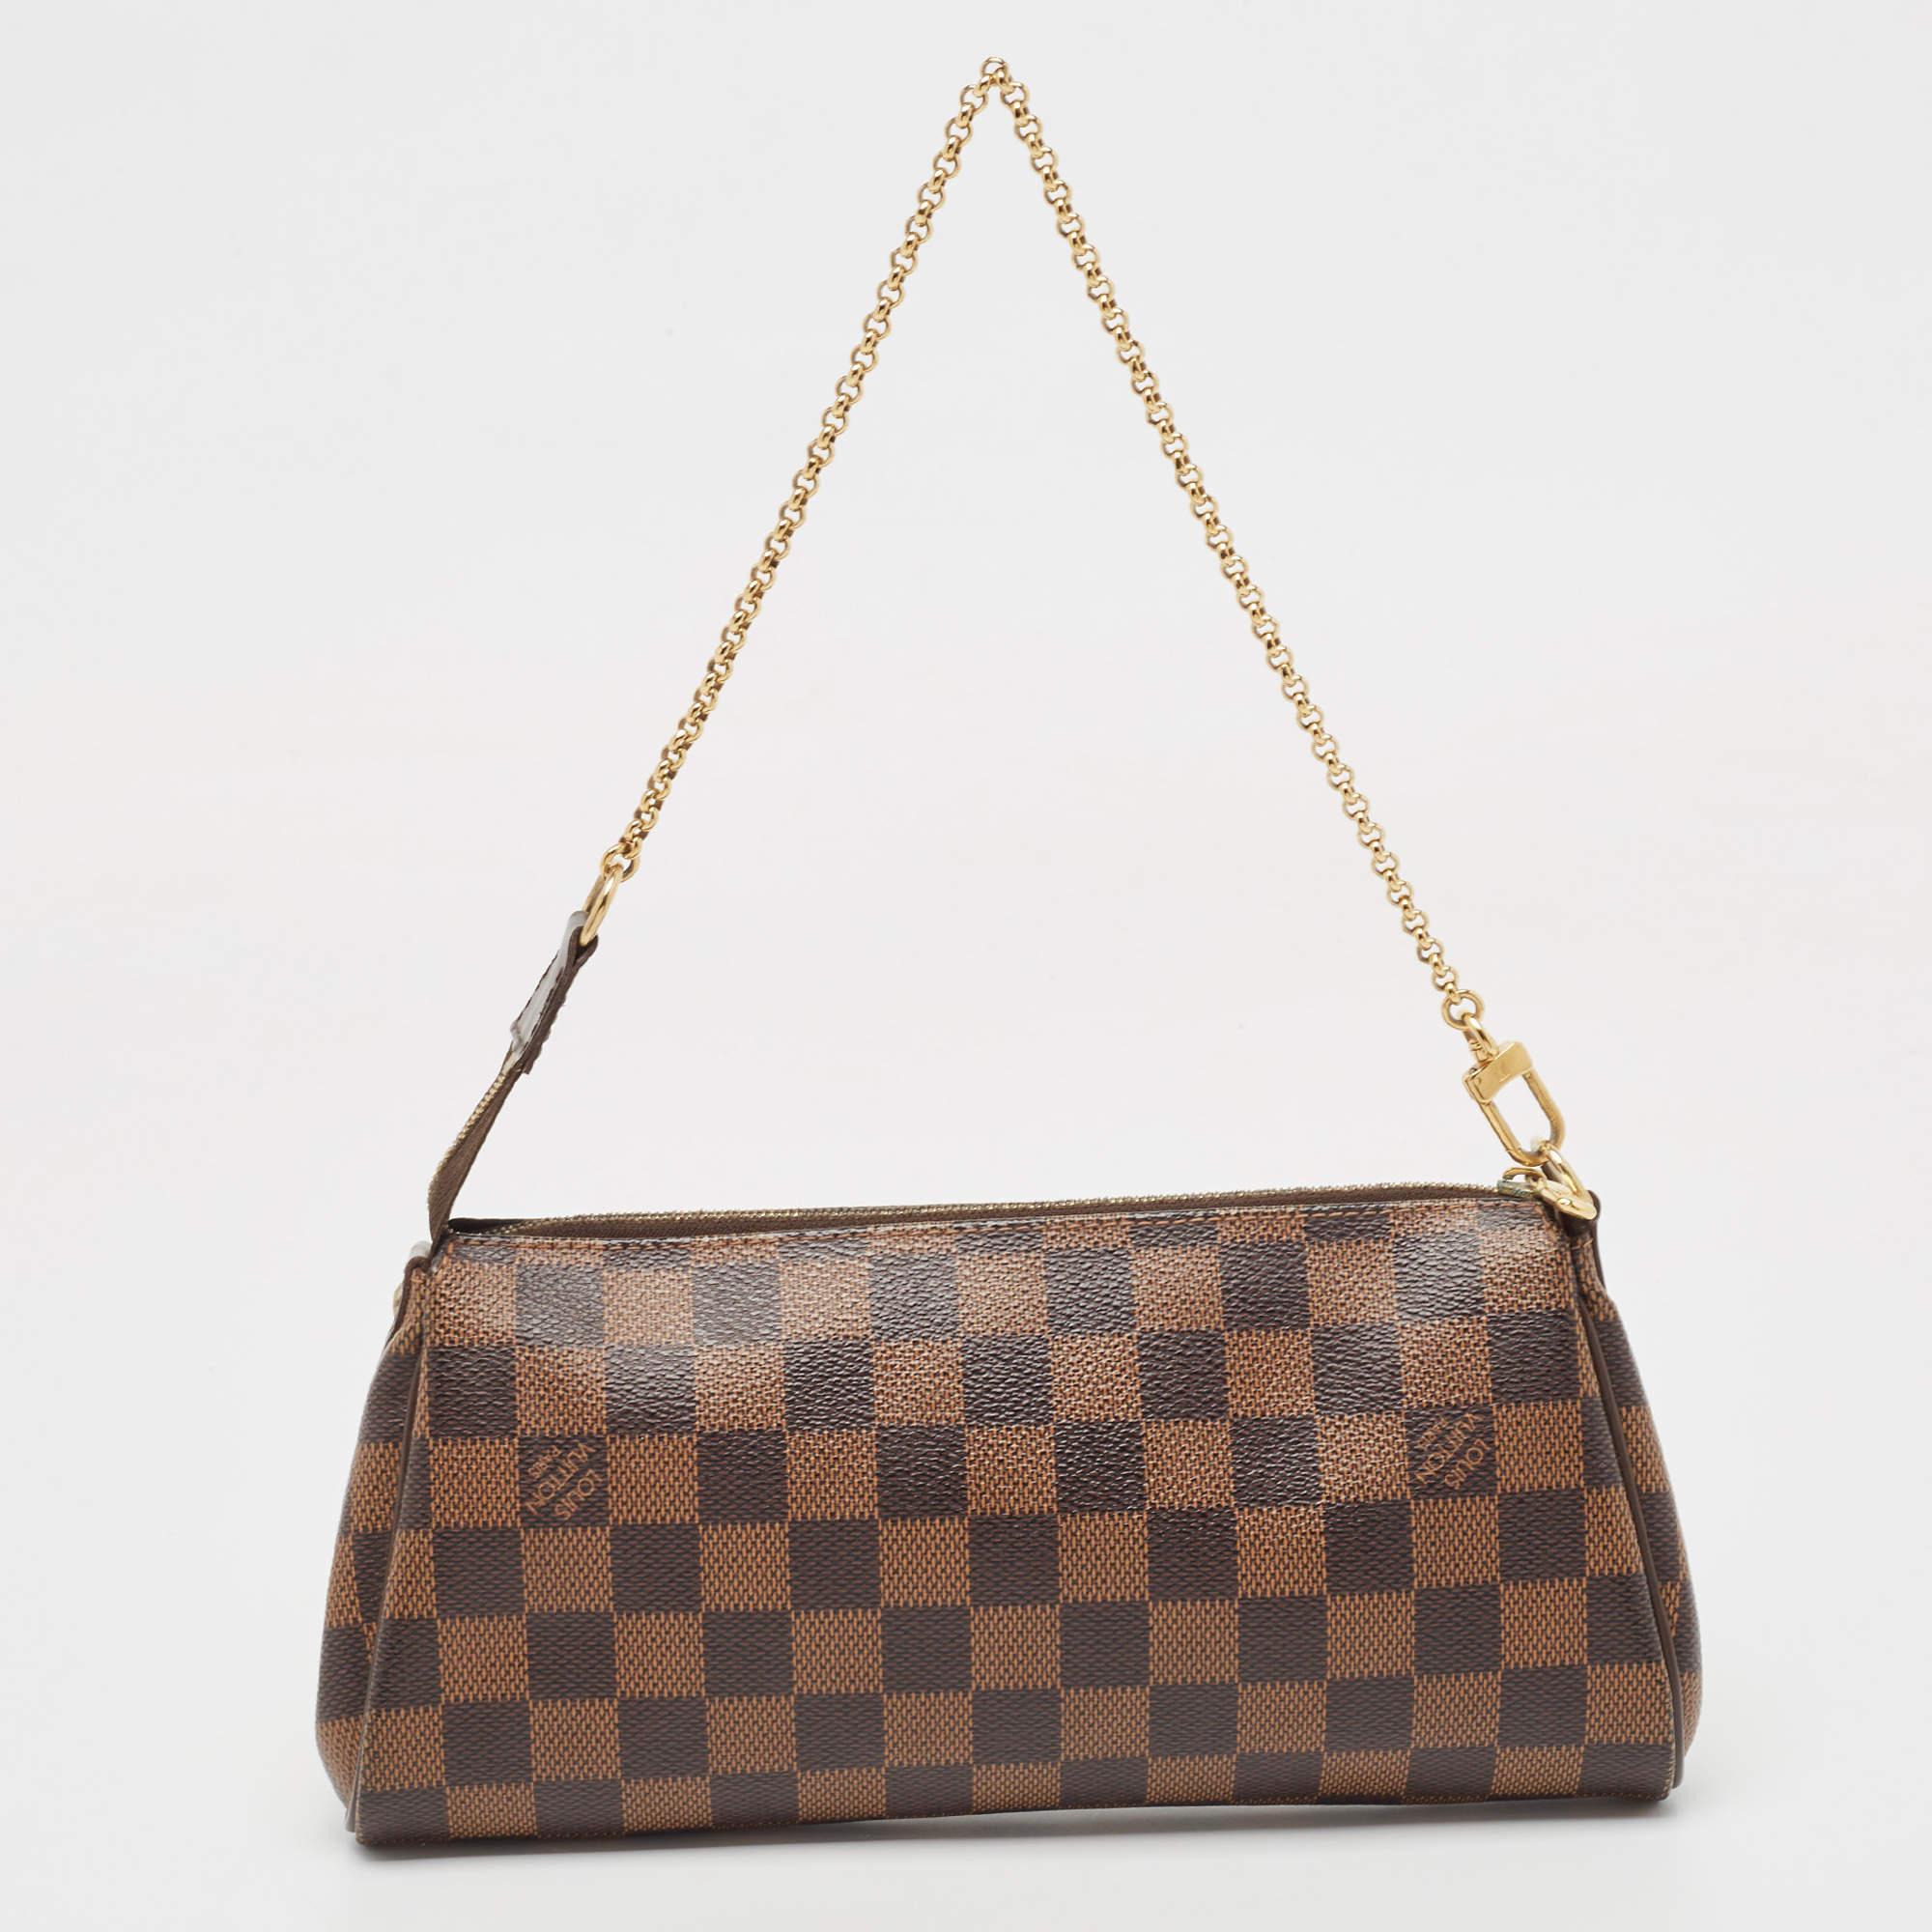 Crafted from Damier Ebene canvas, this Eva Pochette bag is a creation by Louis Vuitton. The bag features a well-sized canvas interior that is secured by a gold-tone zipper. It comes with a chain and a leather strap.

